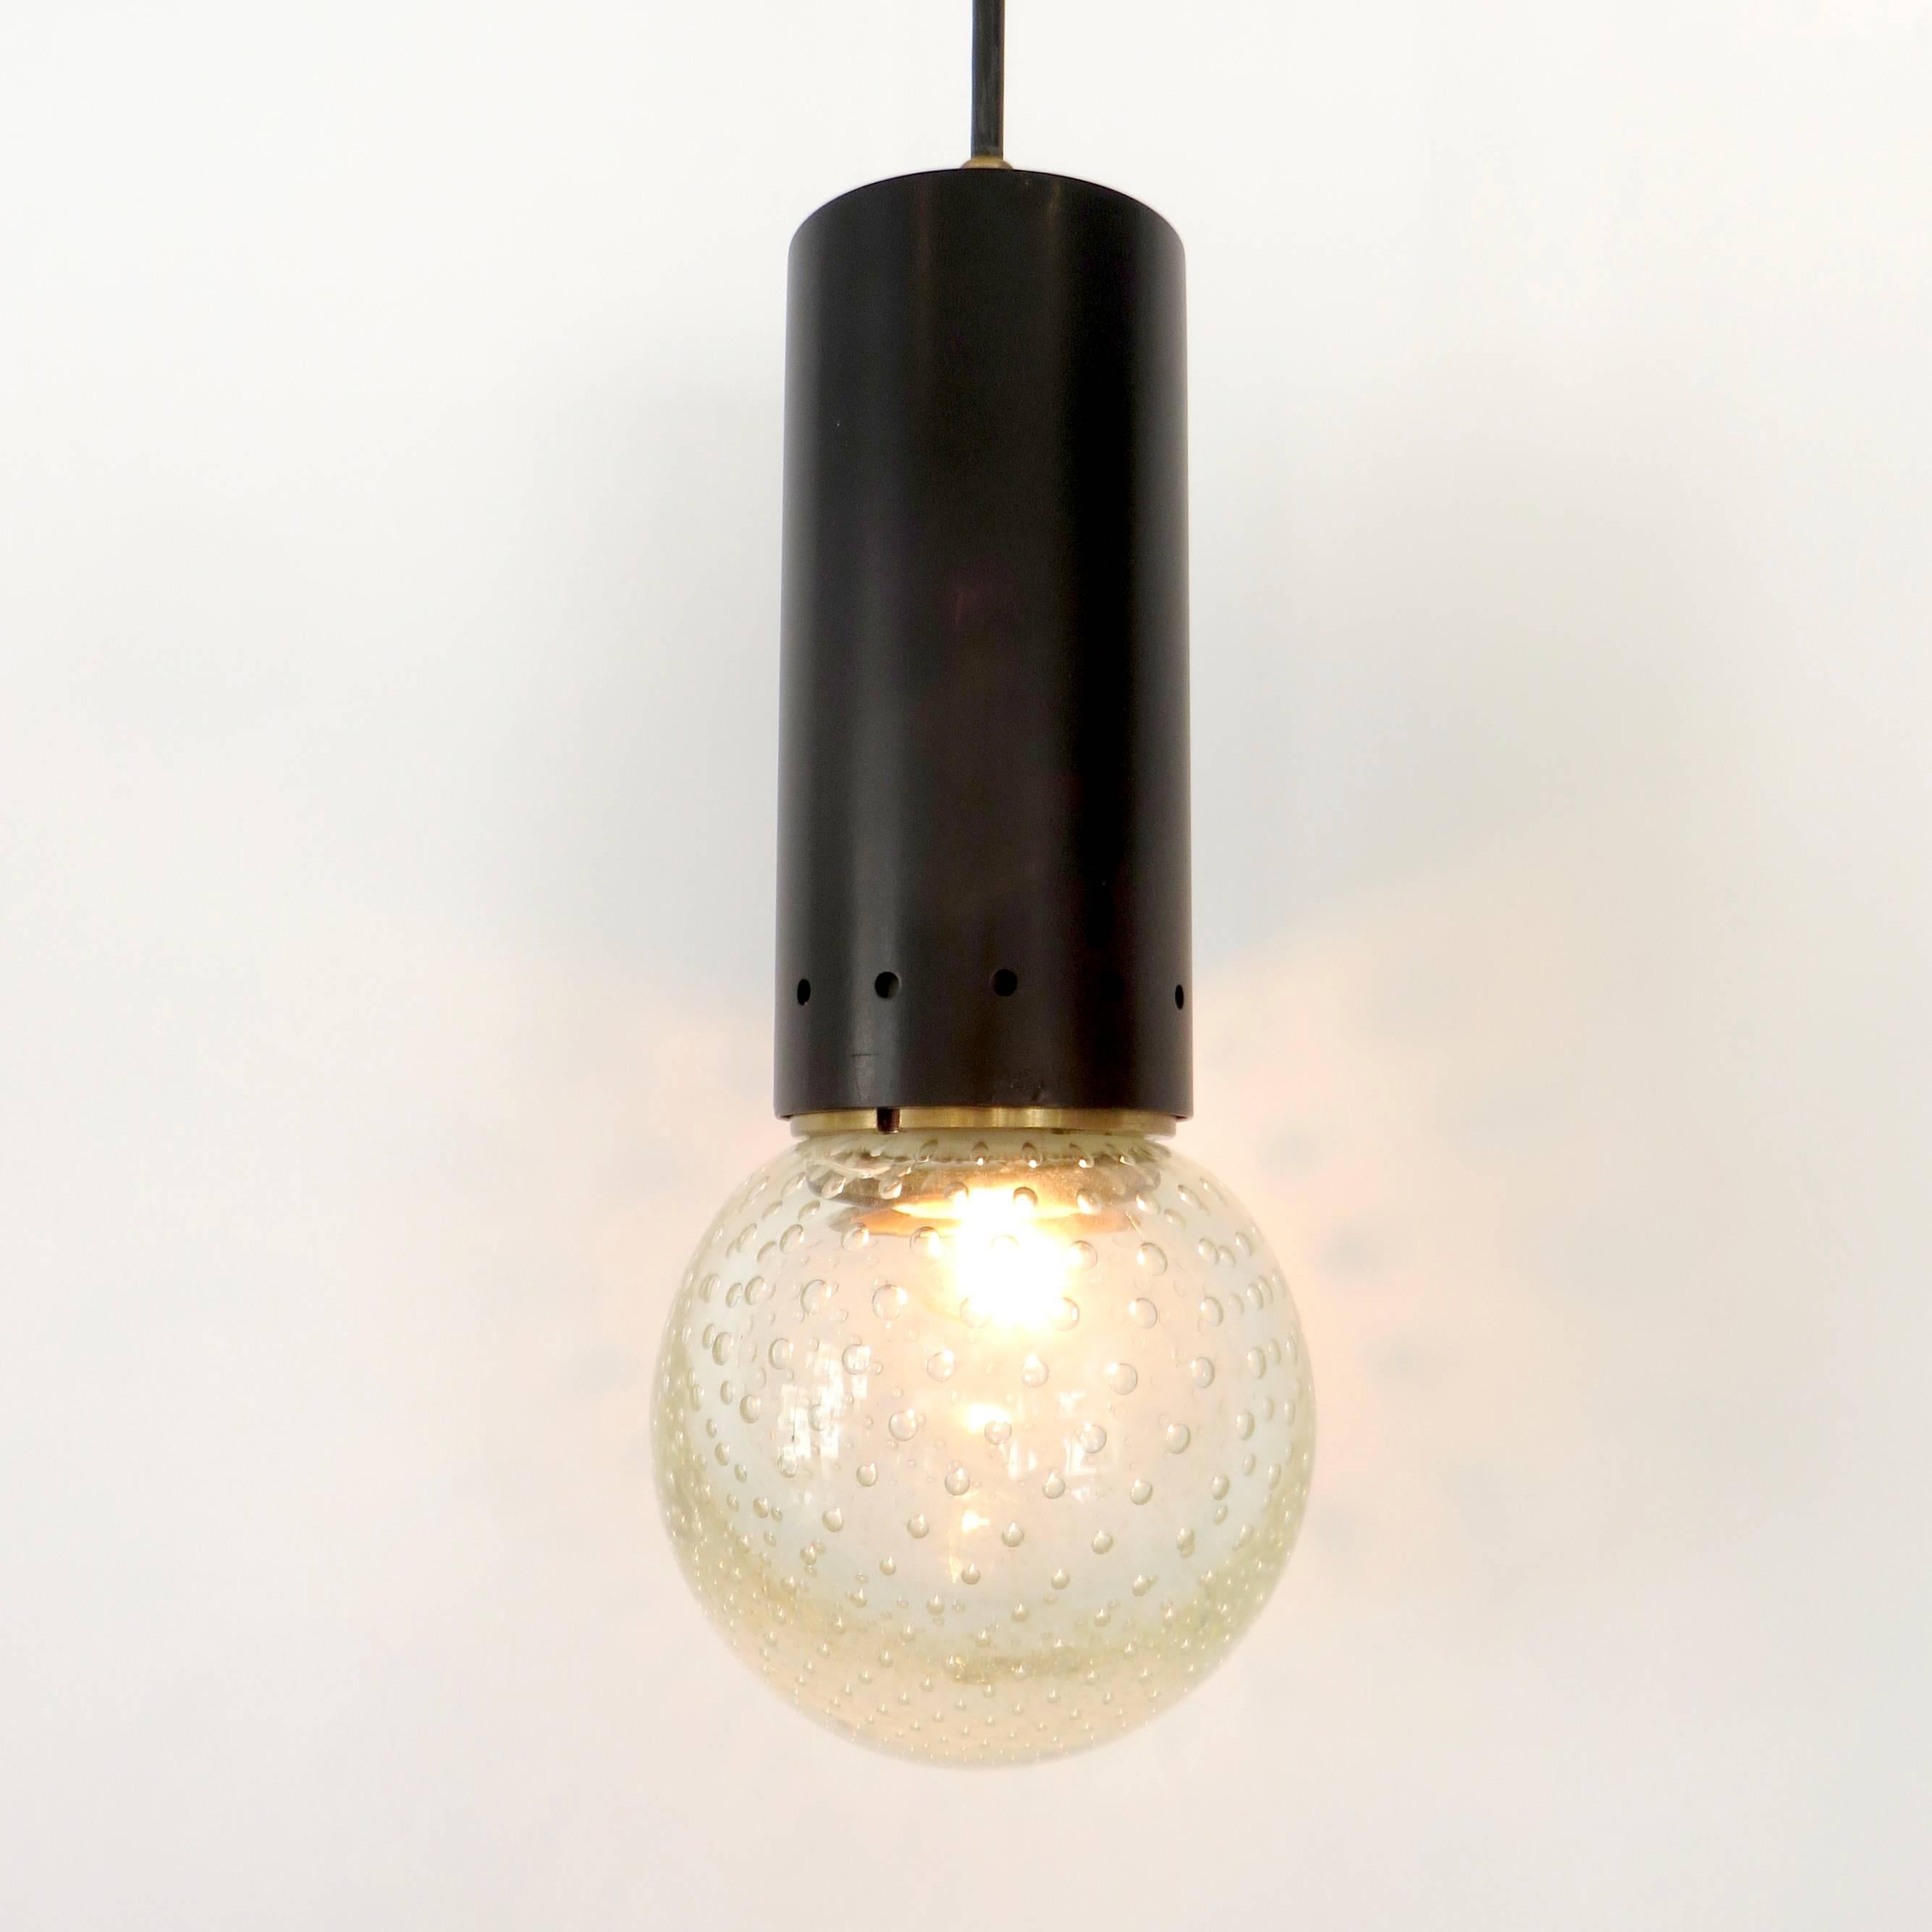 A single Murano glass pendant by Gino Sarfatti with Archimede Seguso for Arteluce. 
Perfect condition. The length of the 8ft long black hanging cord can be altered for the location. Black ceiling cap included.
Rewired for USA.
Overall size 4.5